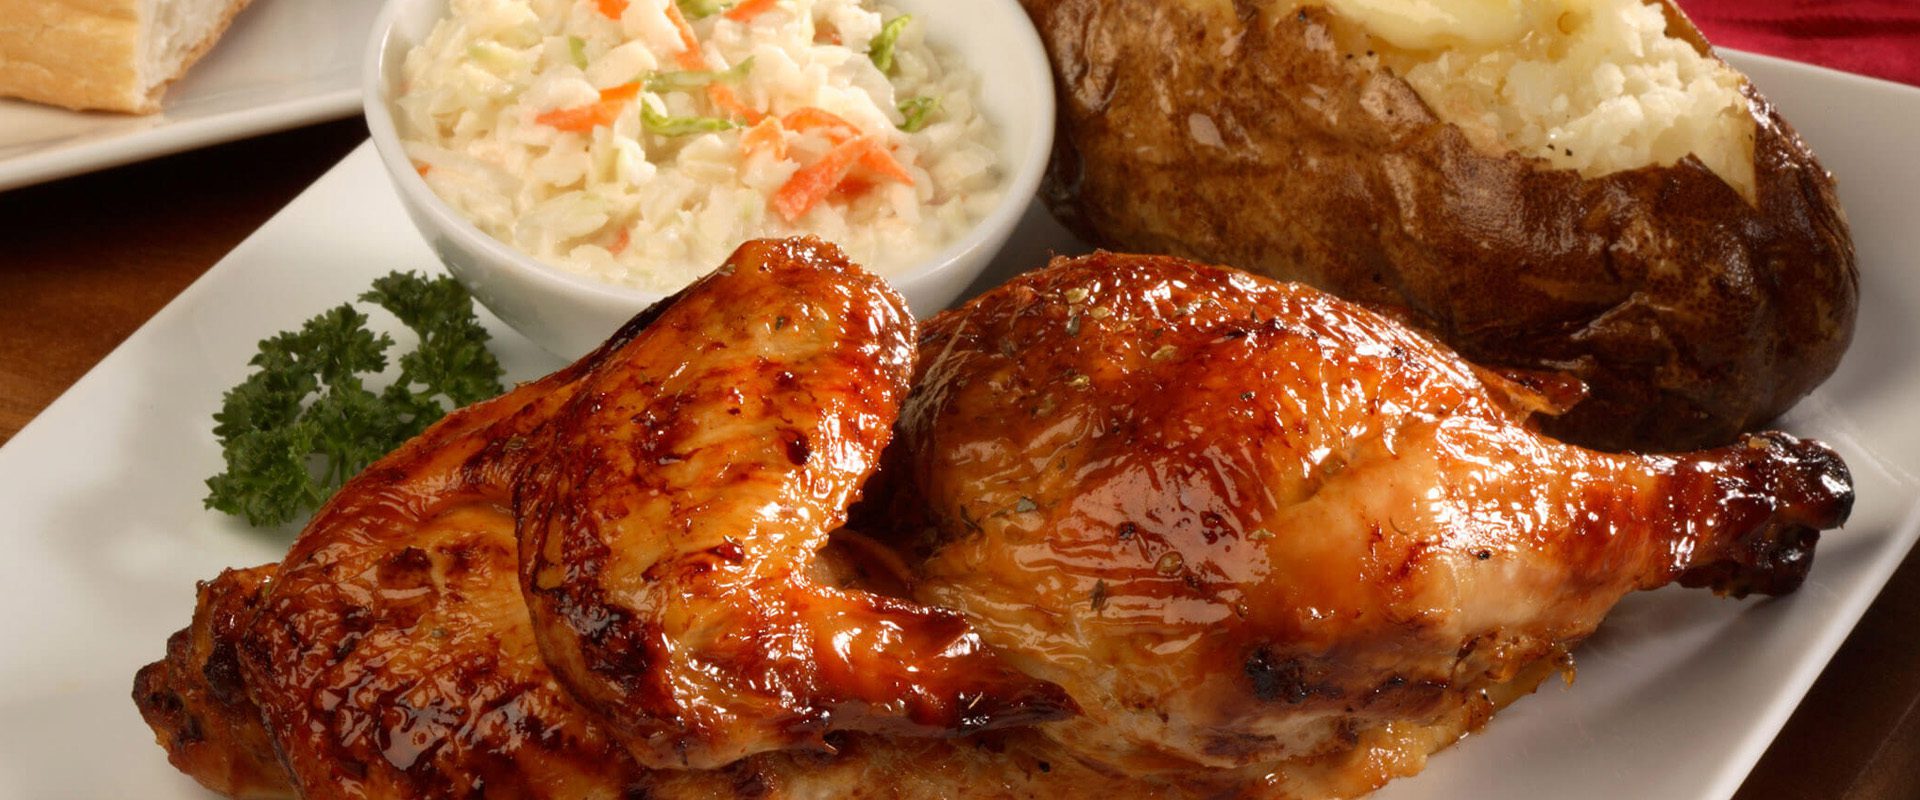 Rotisserie Chicken Dinner dish with a hot potato and salad on the side.